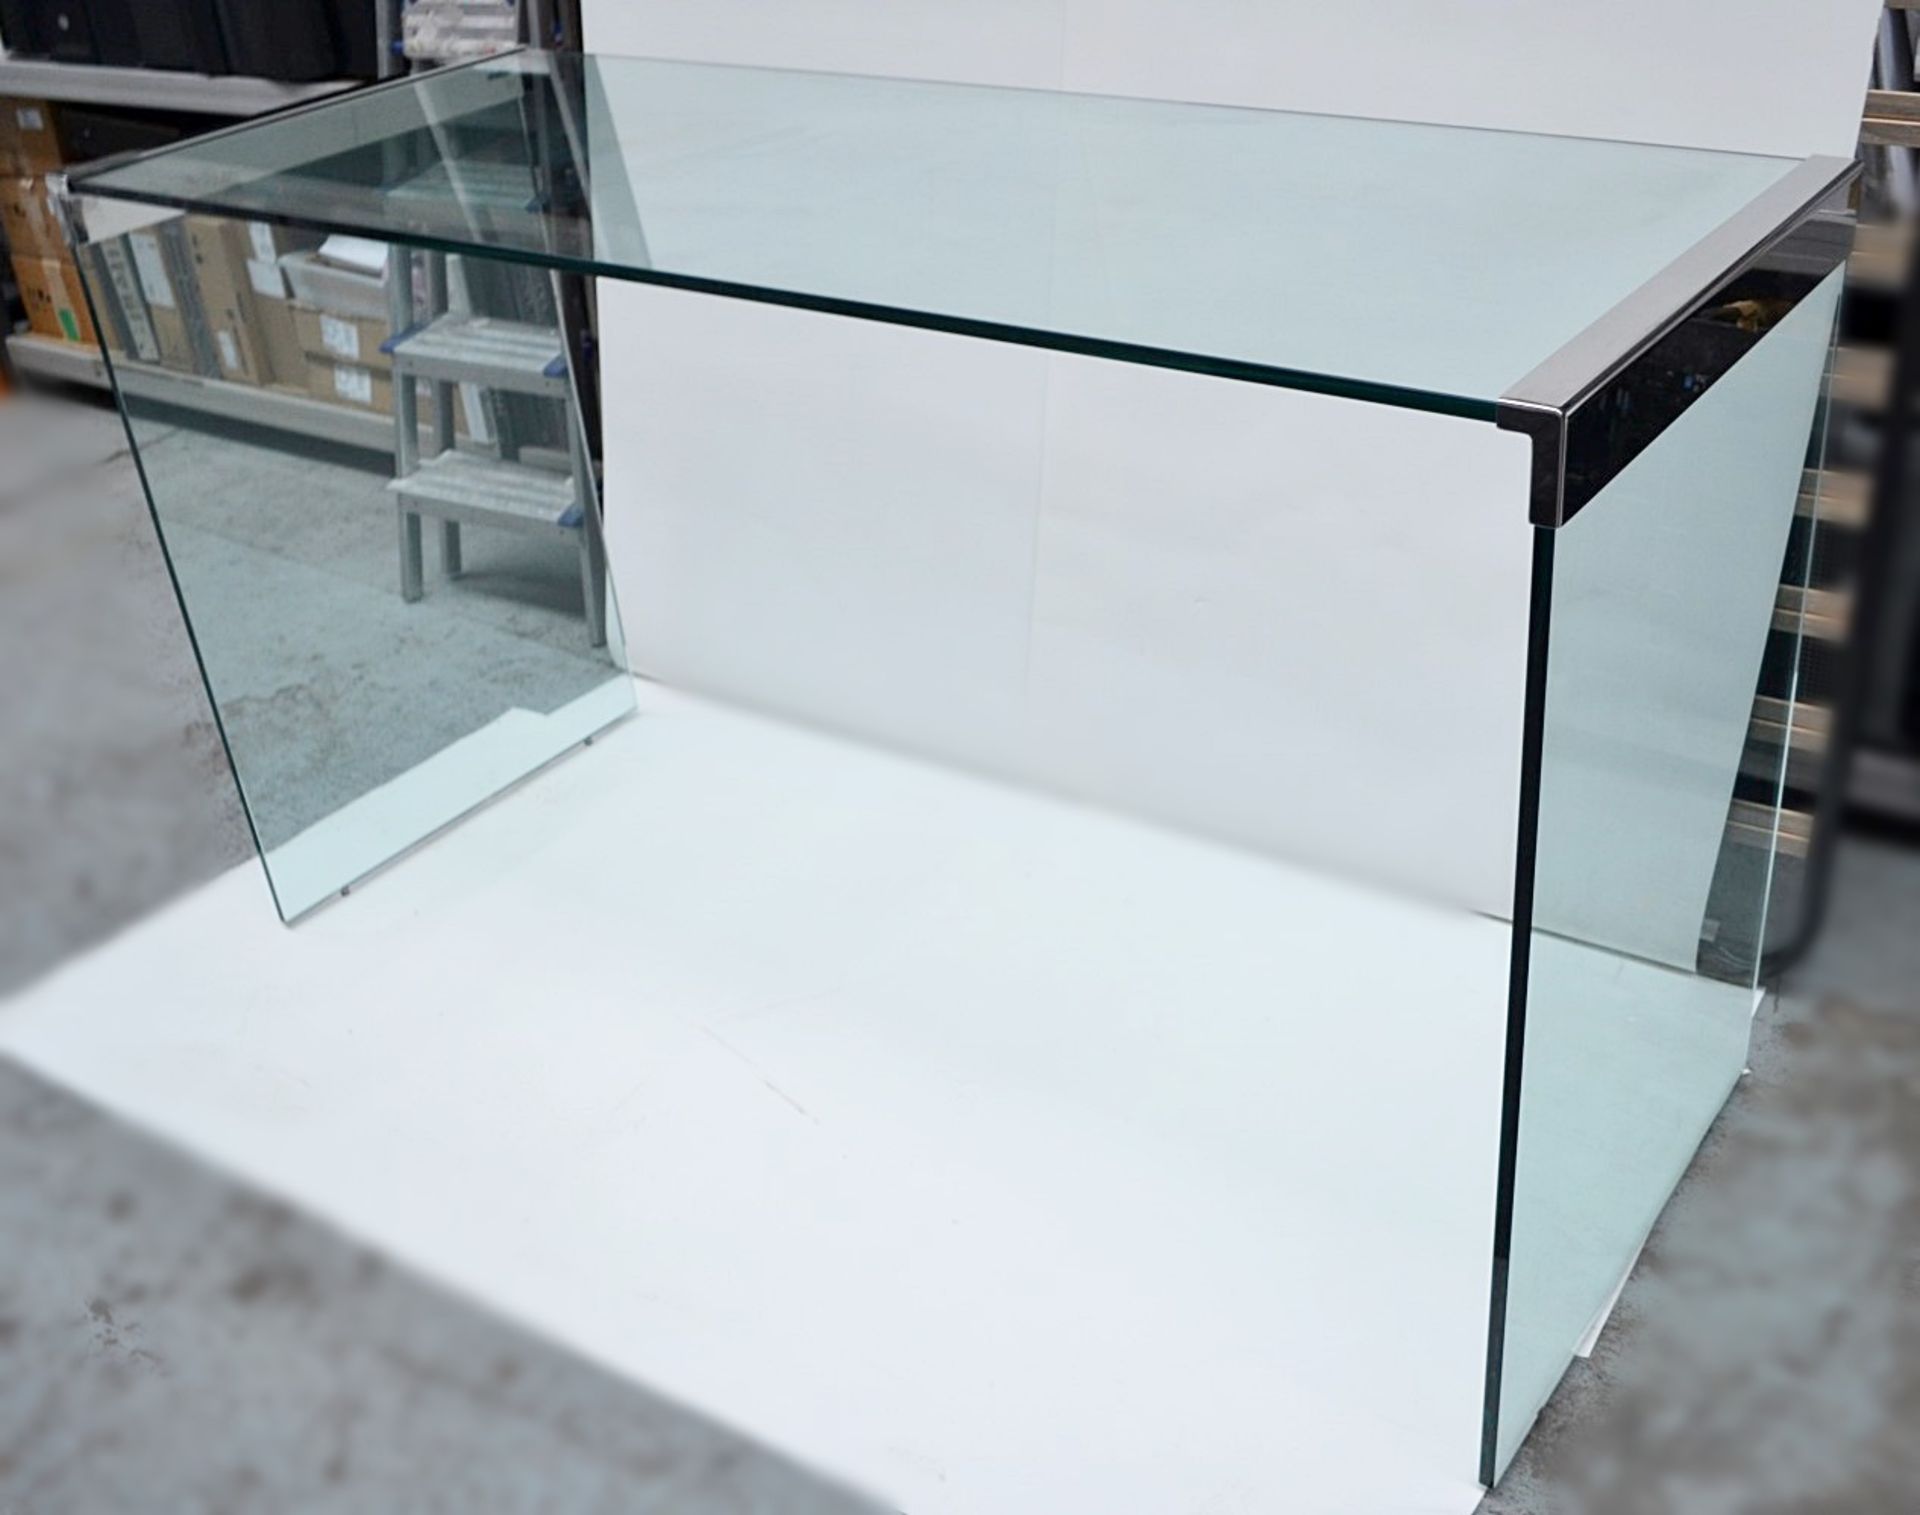 1 x FENDI Canova Glass Console Table With Chromed Corners - Dimensions: W170 x D65 x H99cm, Glass - Image 4 of 10